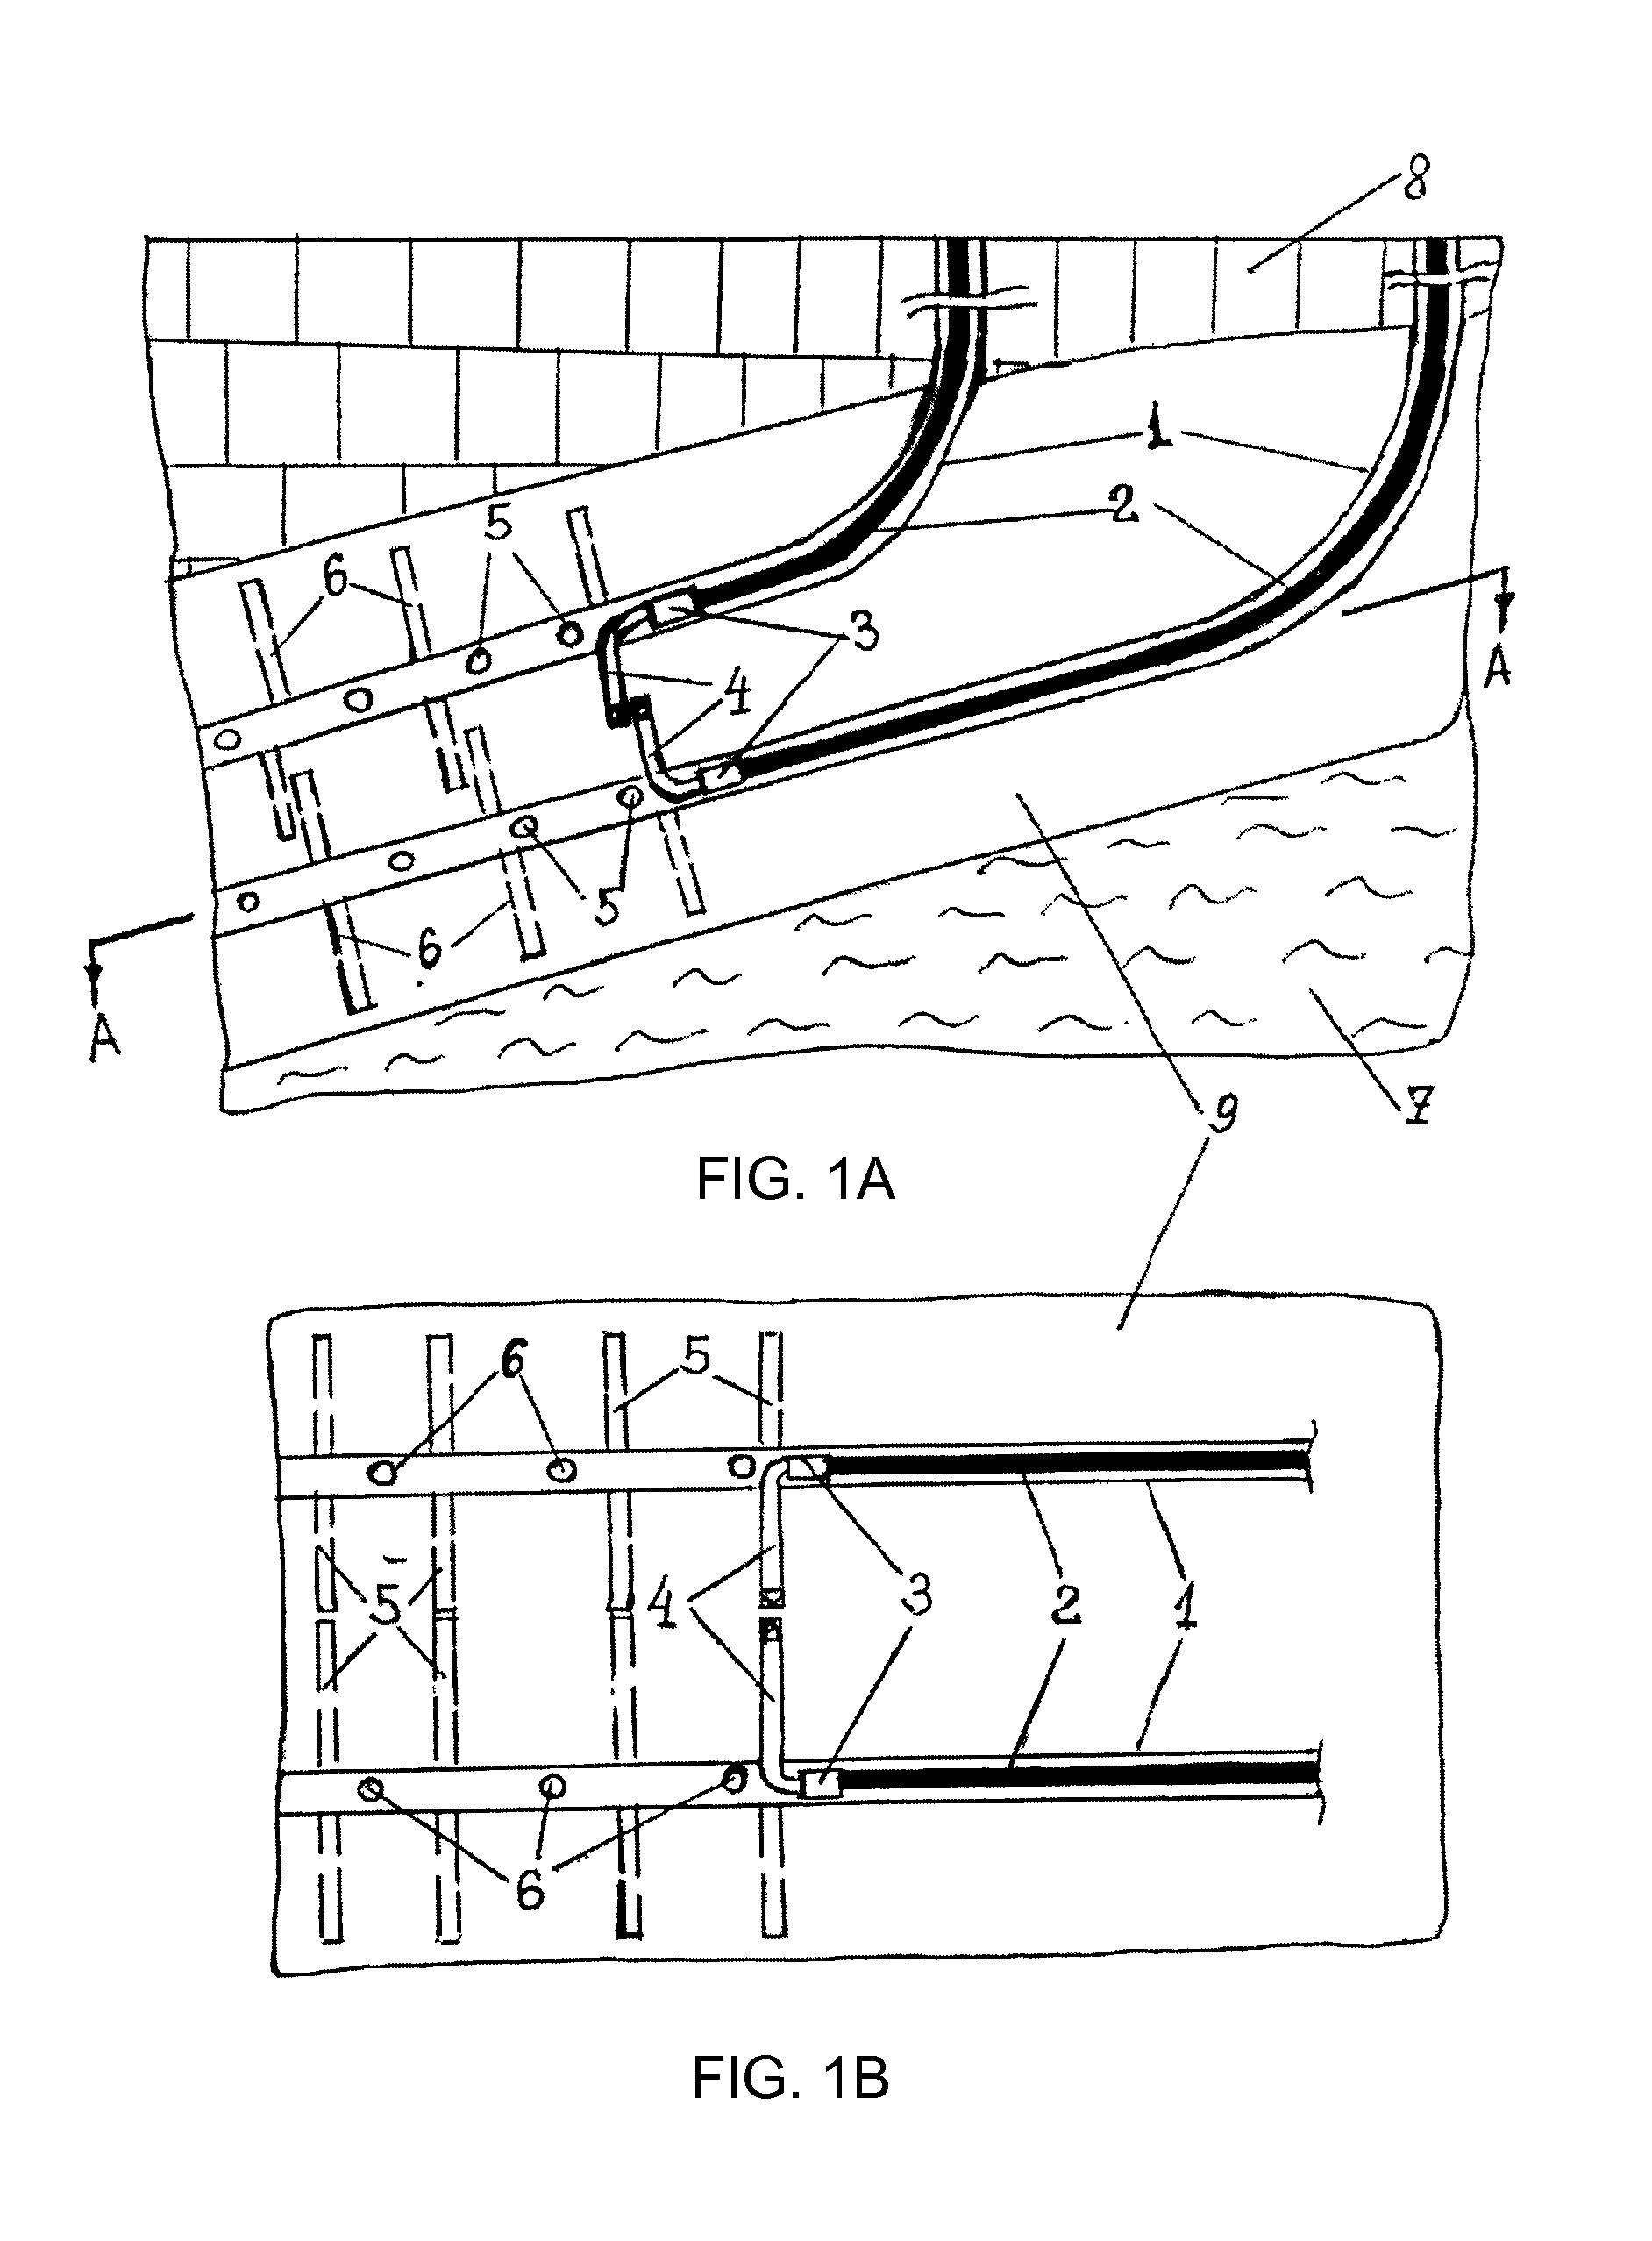 Method For Developing Oil And Gas Fields Using High-Power Laser Radiation For
More Complete Oil And Gas Extraction